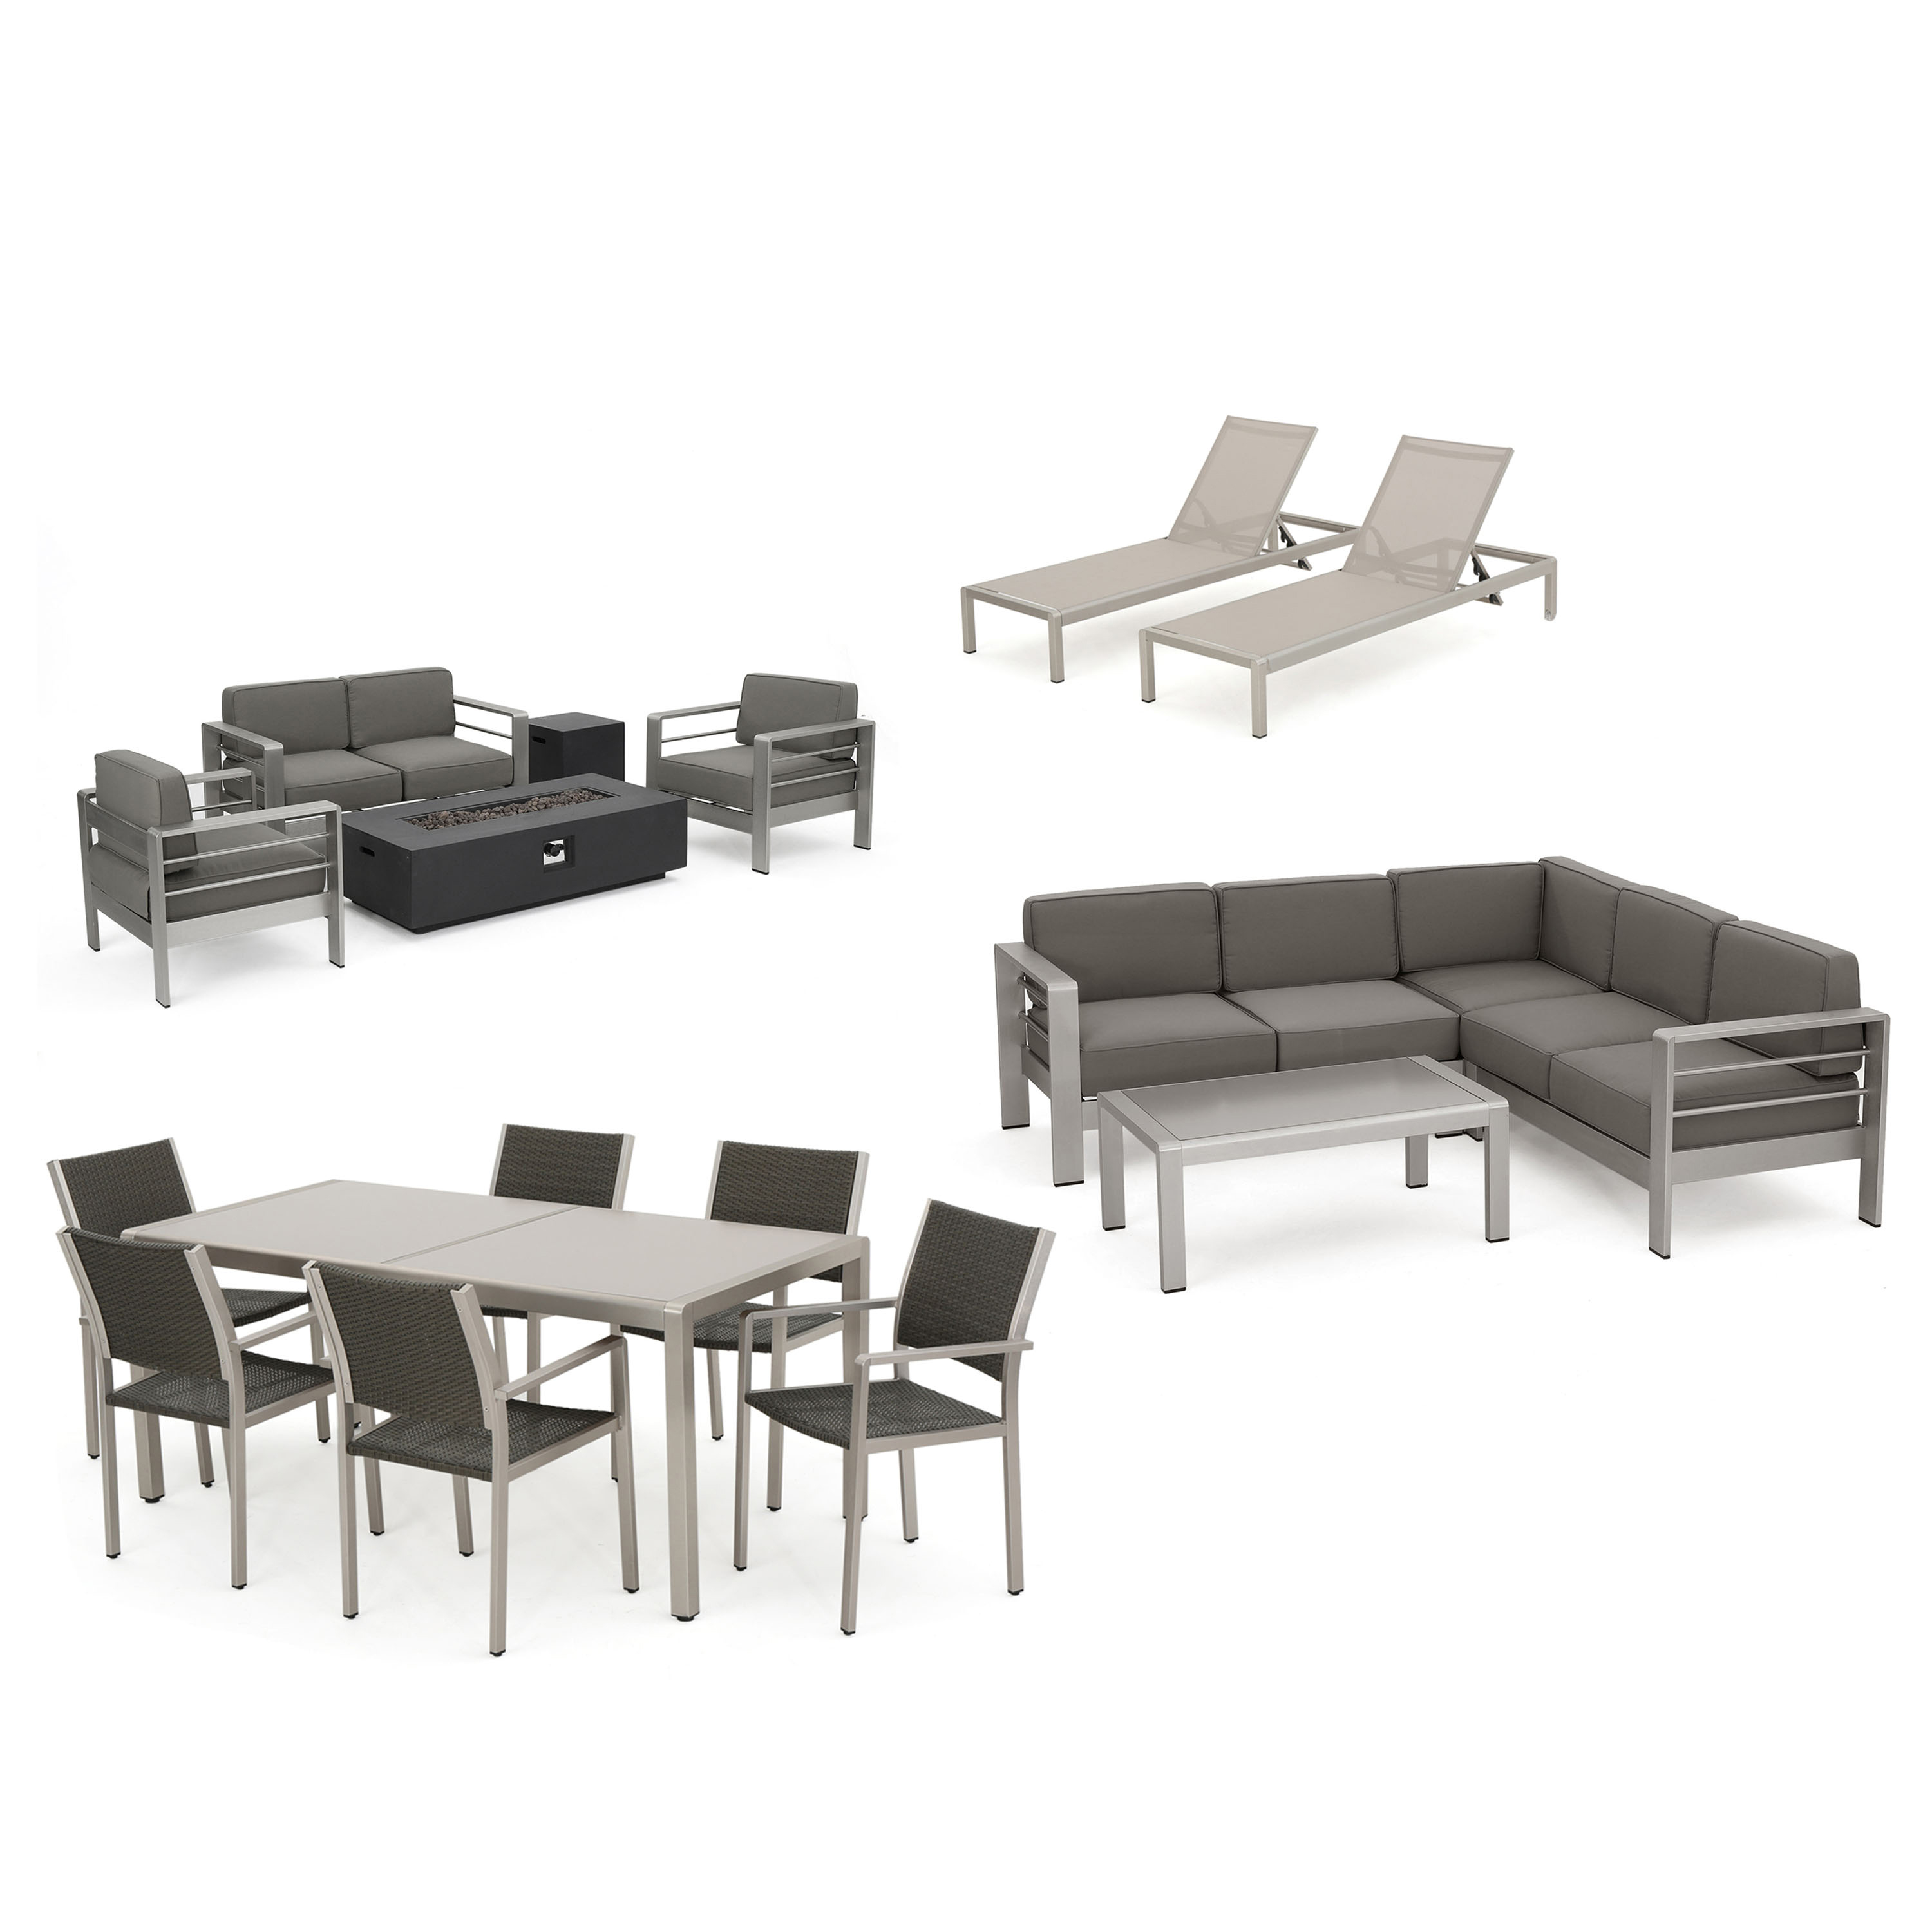 Miller Outdoor Sofa and Chat Sets with a Glass Top Dining Set, Lounges, and a Grey Firepit, Khaki, Silver - image 1 of 11